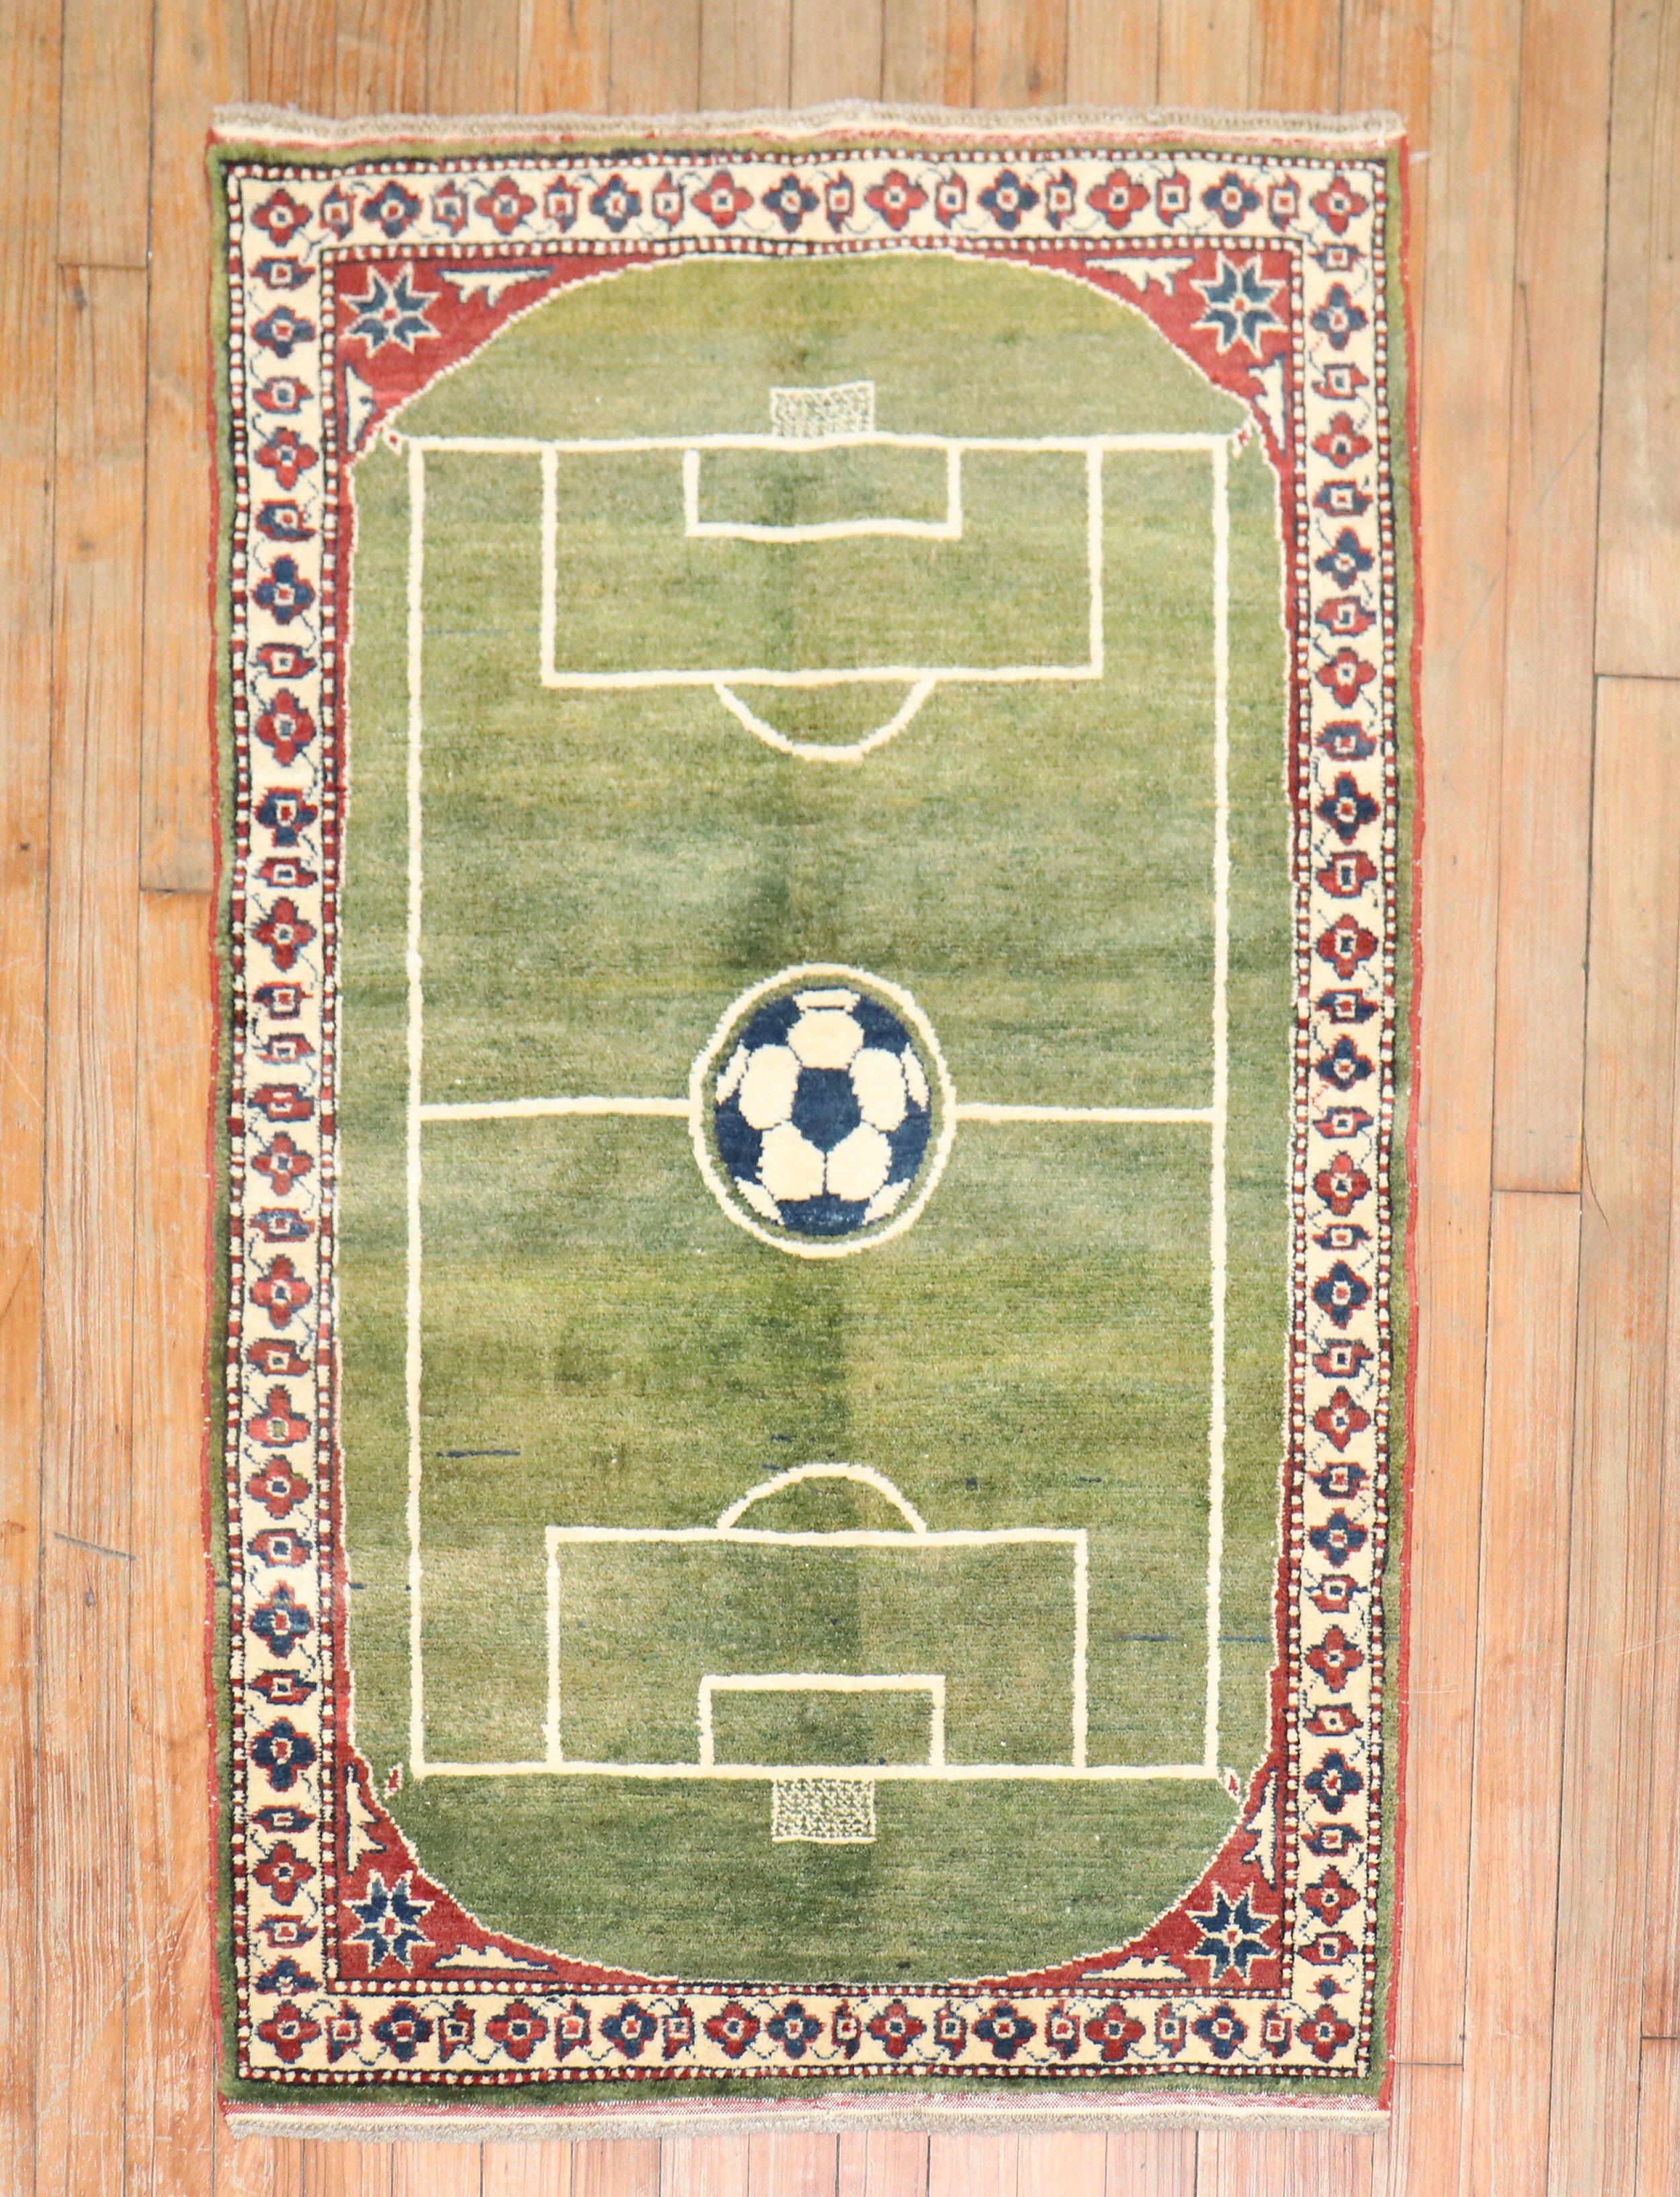 One of a kind hand-knotted 100 % vegetable-dyed rug depicting a soccer field surrounded by a traditional border.

Measures: 2'7'' x 4'.